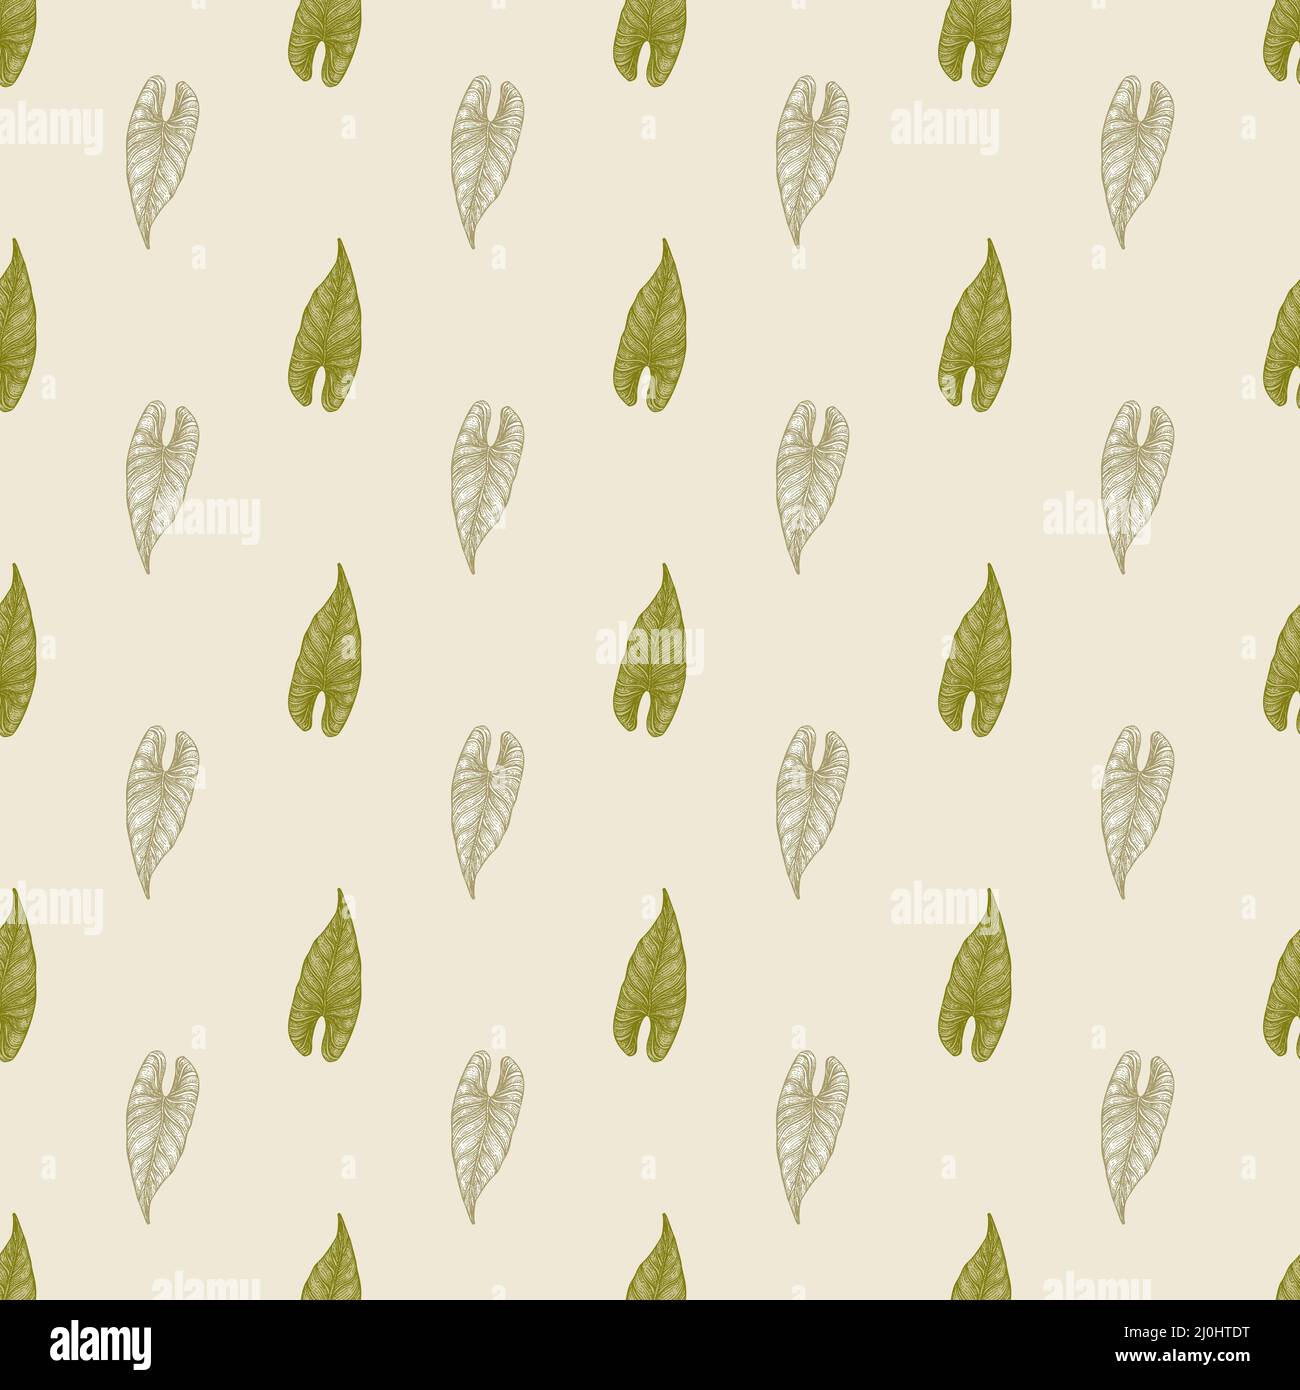 Engraving leaf araceae seamless pattern. Vintage leaves background. Repeated texture in hand drawn style for fabric, wrapping paper, wallpaper, tissue Stock Vector